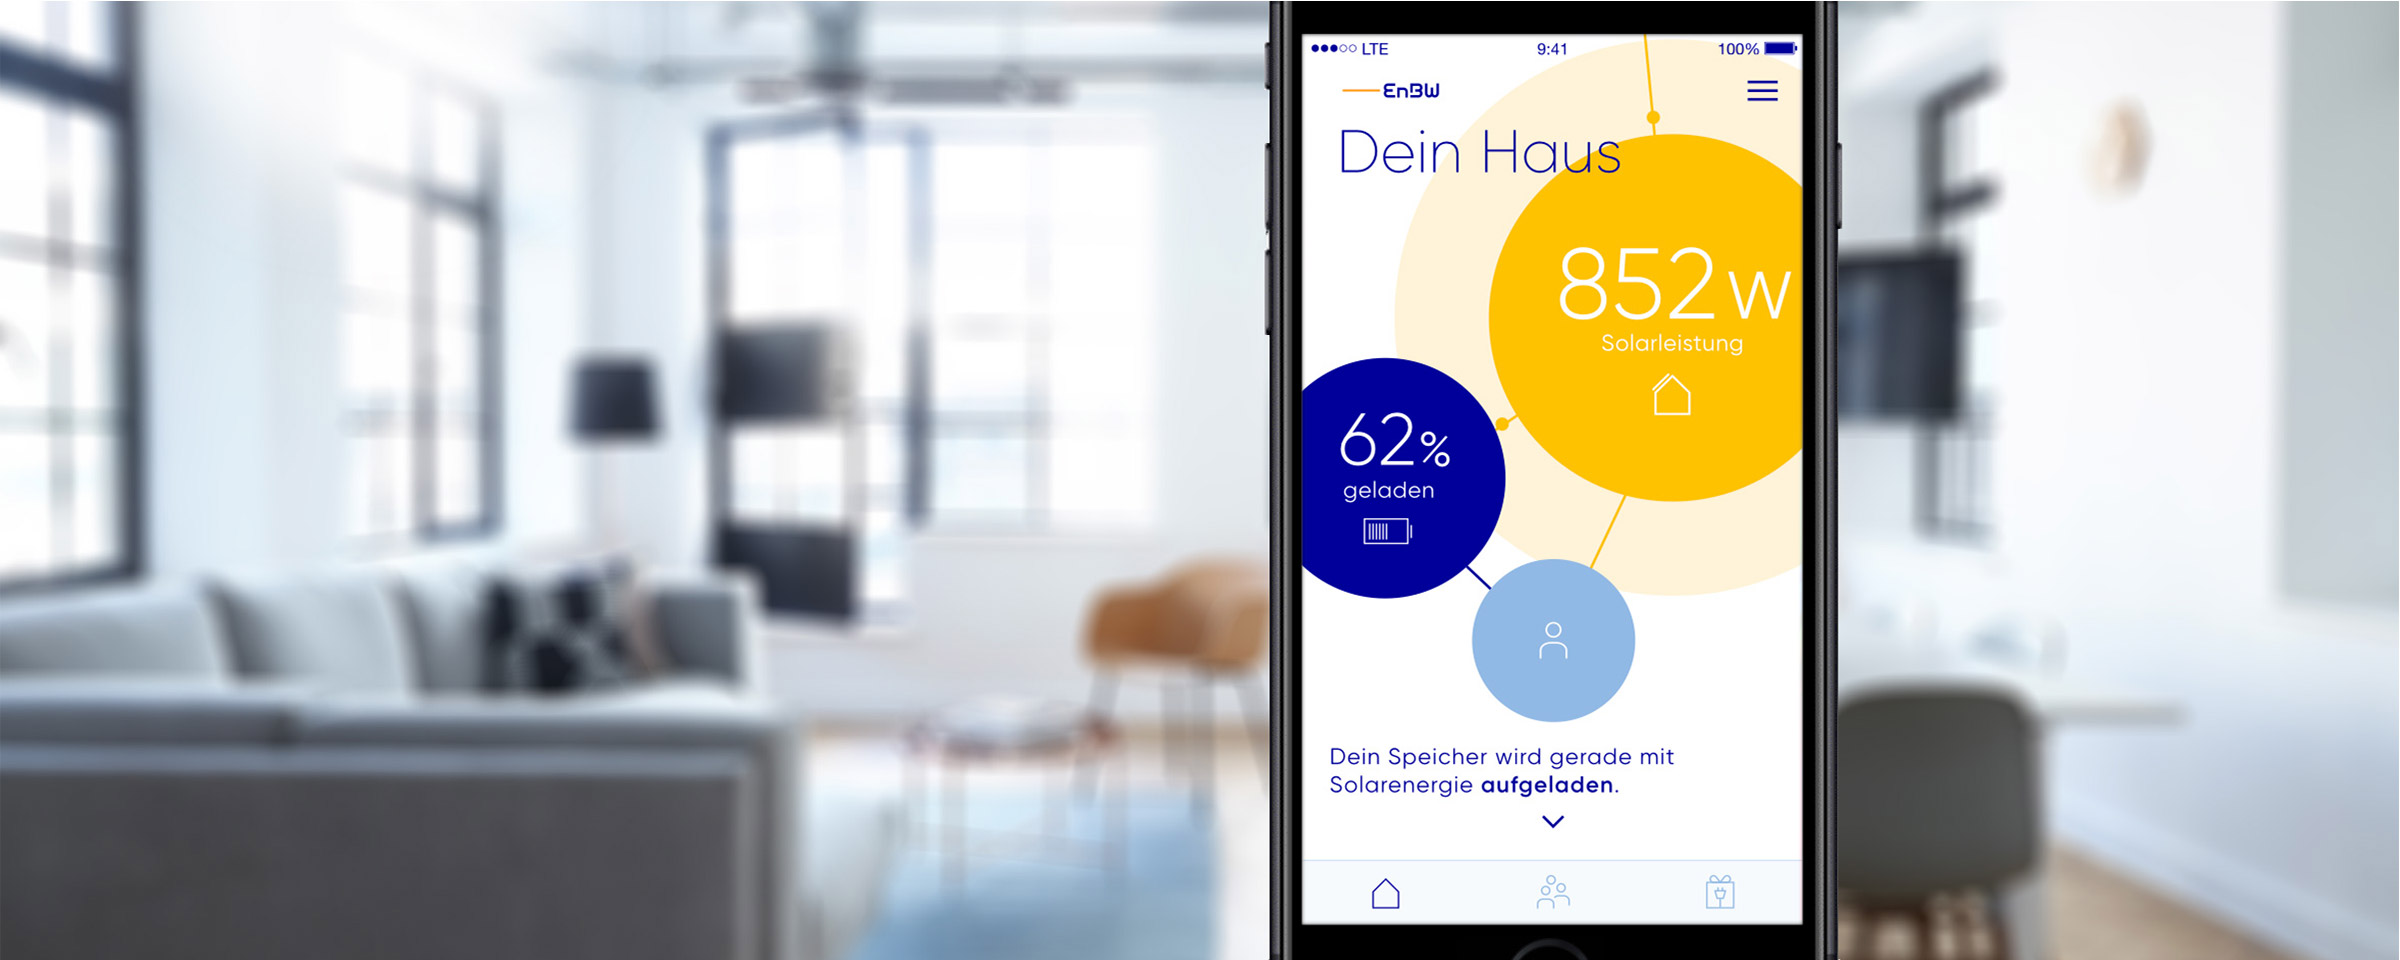 EnBW App shows the current solar output of a house, with a living room in the background